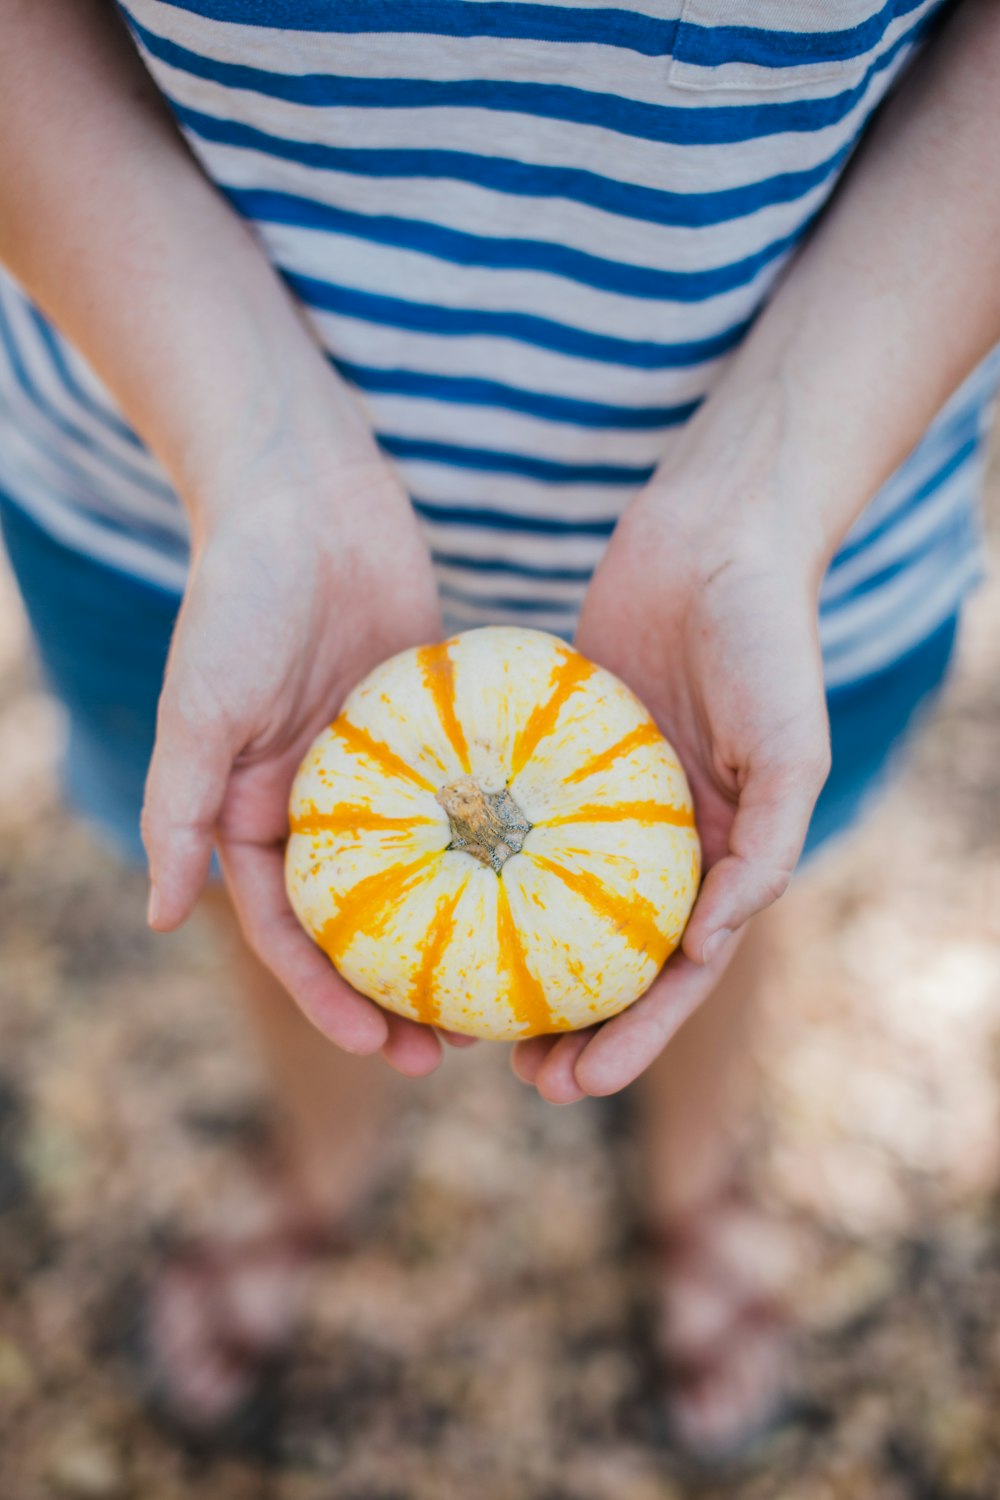 a person holding a pumpkin in their hands